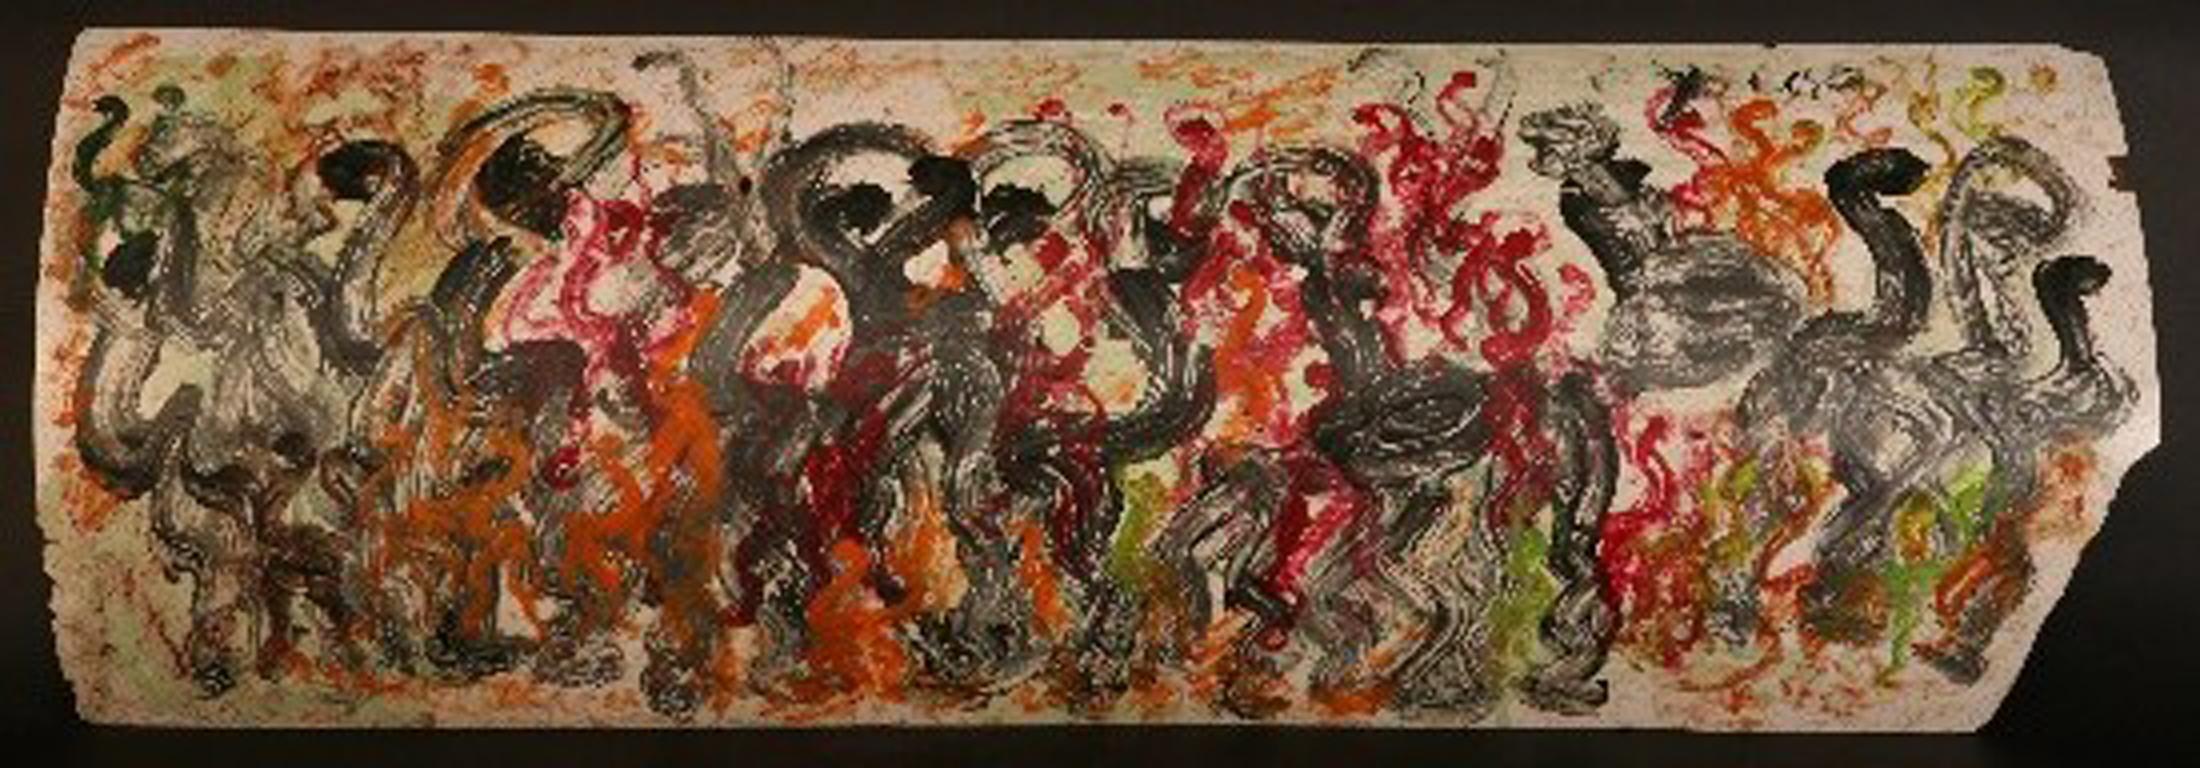 Figures - Mixed Media Art by Purvis Young